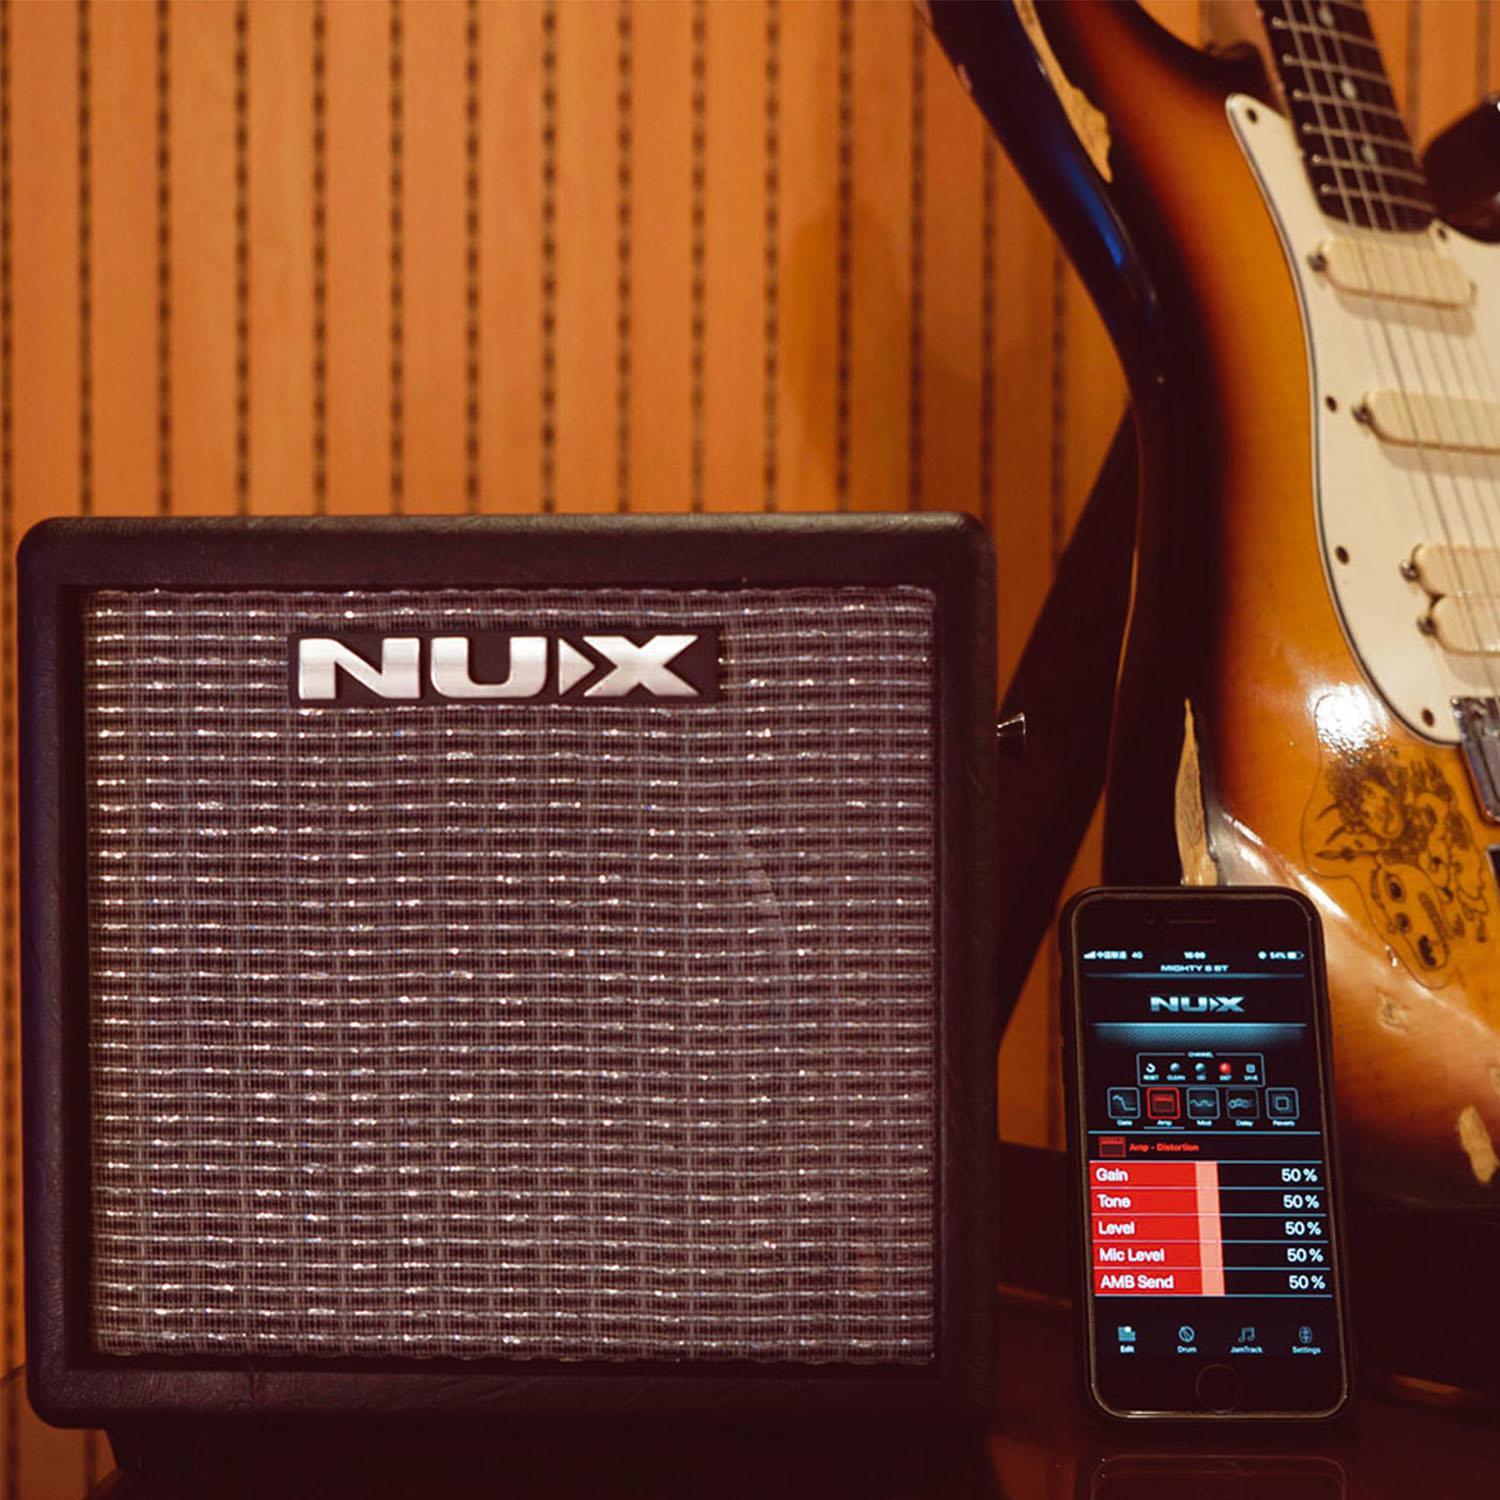 NUX Mighty 8BT Guitar Amplifier with App and Bluetooth Control - DY Pro Audio